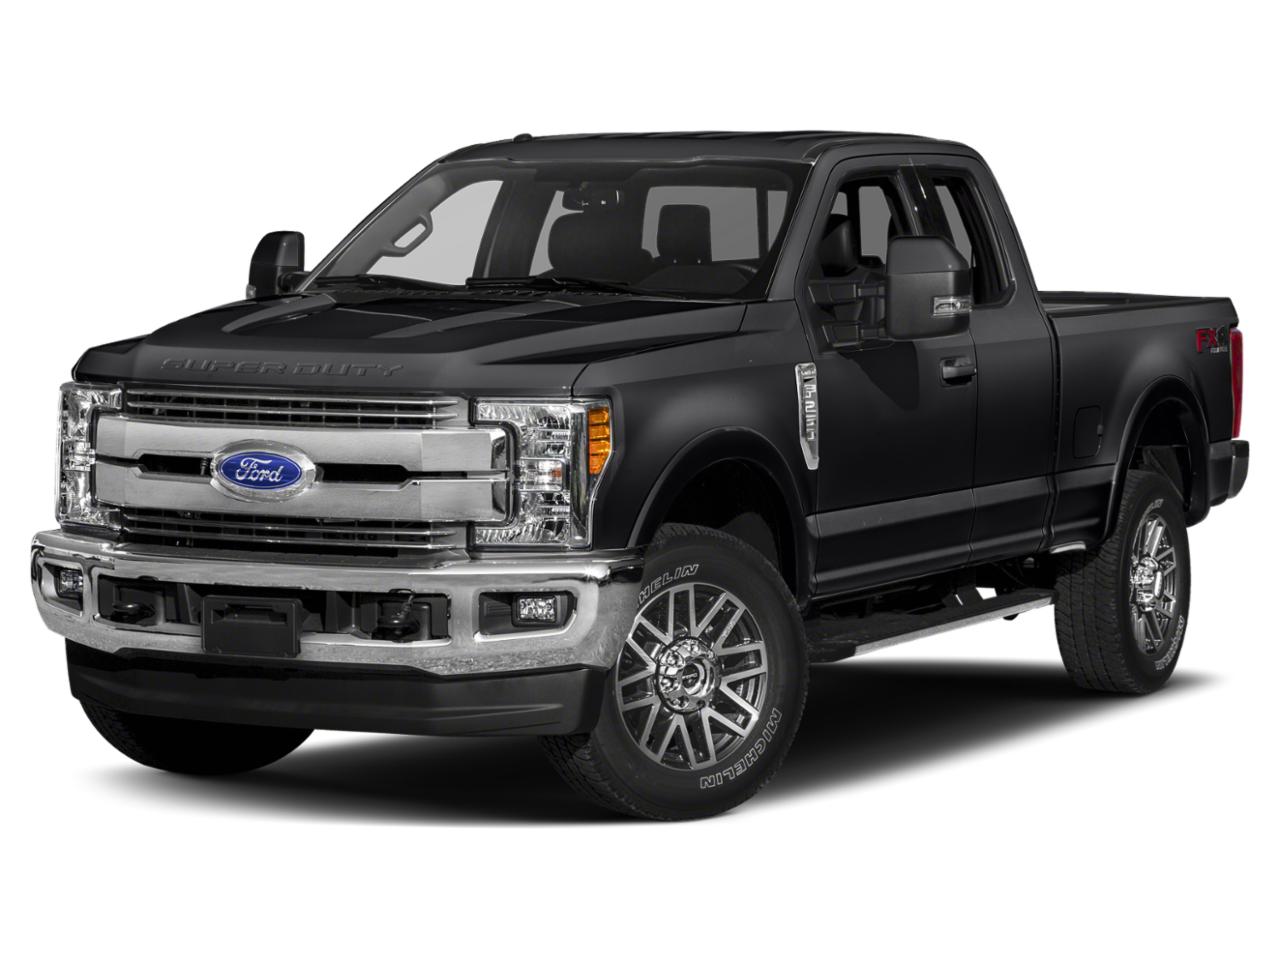 2019 Ford Super Duty F-250 SRW Vehicle Photo in Stephenville, TX 76401-3713